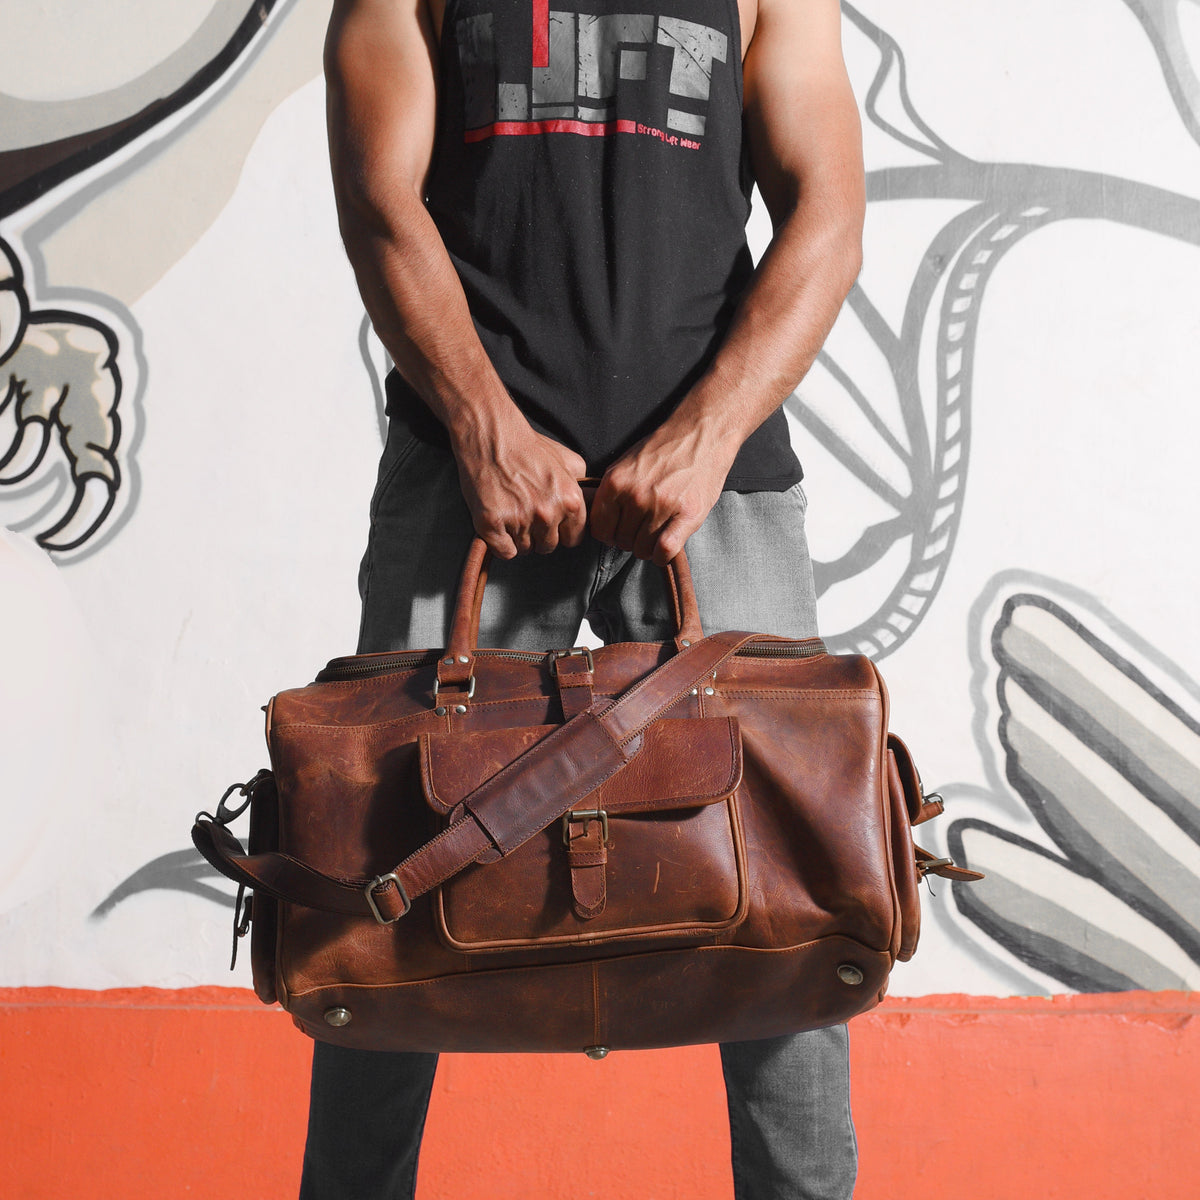 man clutching his leather duffle bag